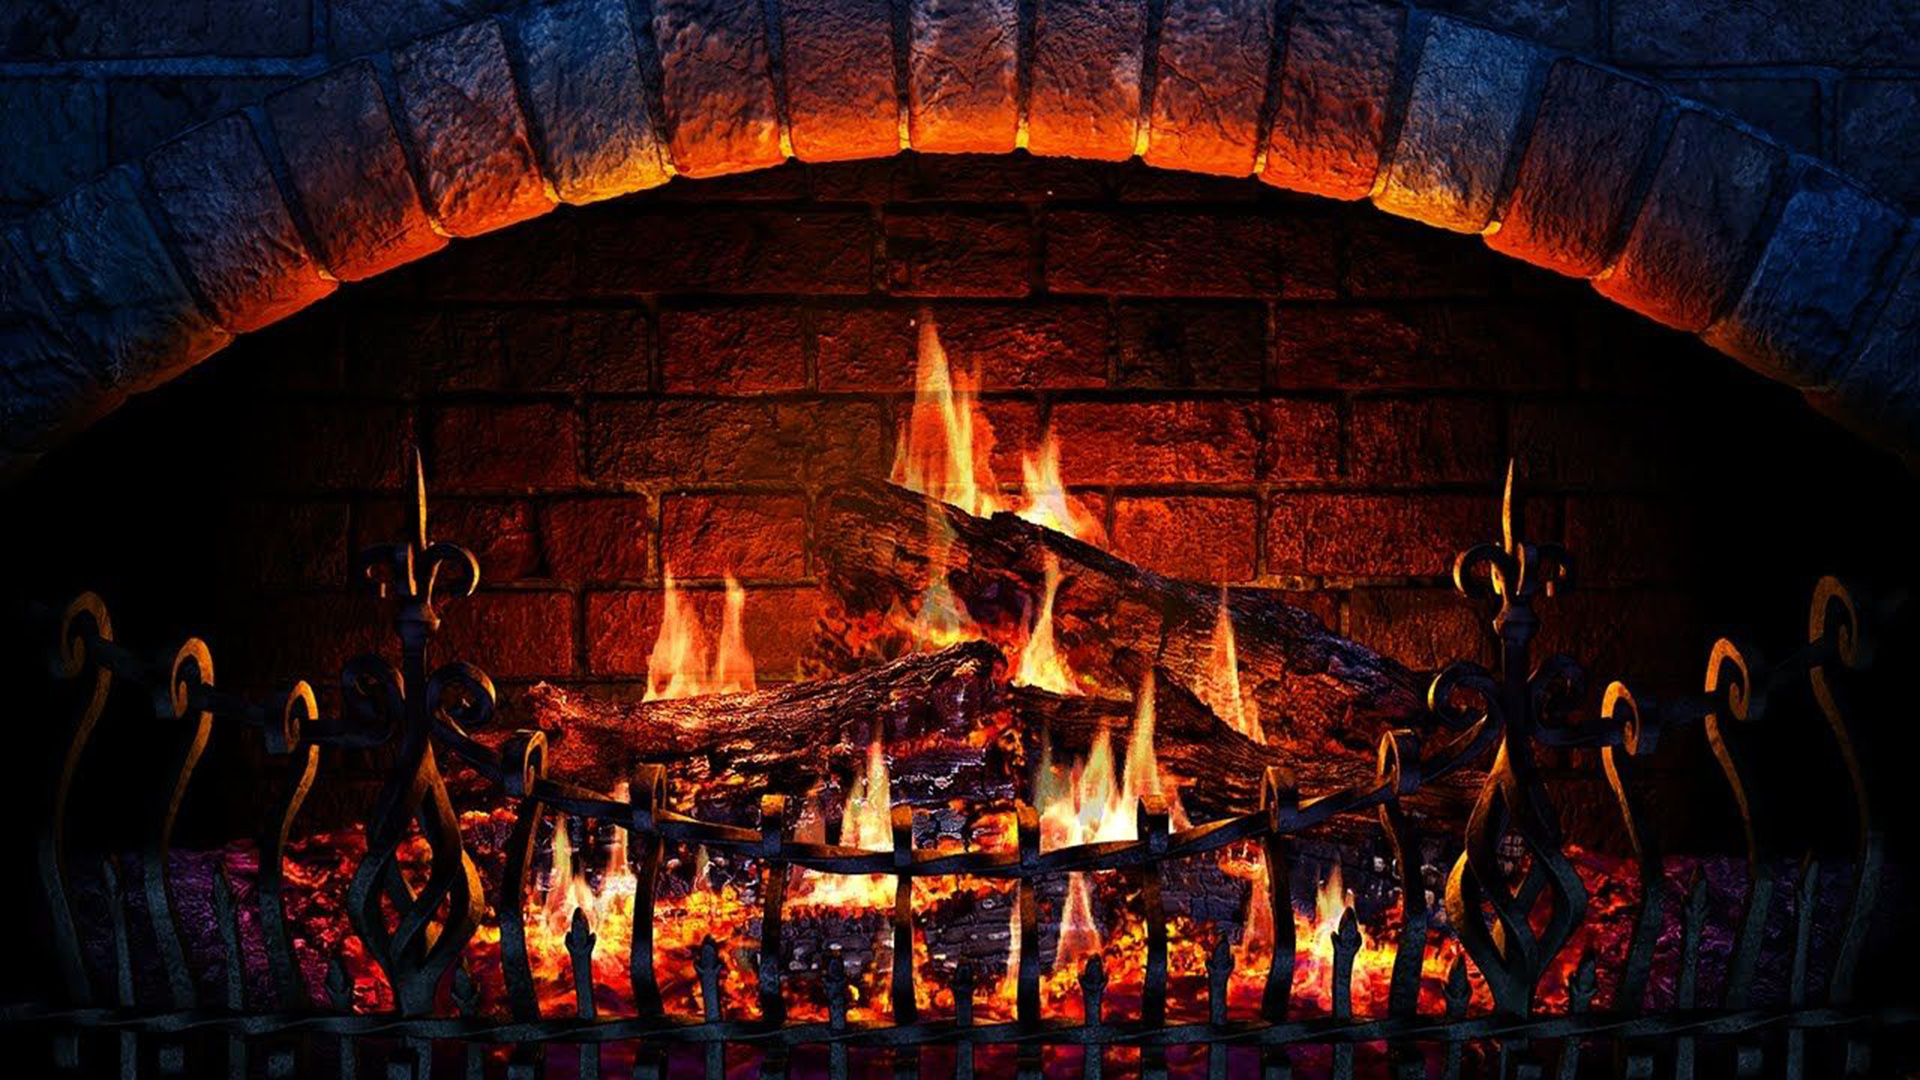 Fireplace: Hearth, Burning wood, The combustion reaction producing heat. 1920x1080 Full HD Background.